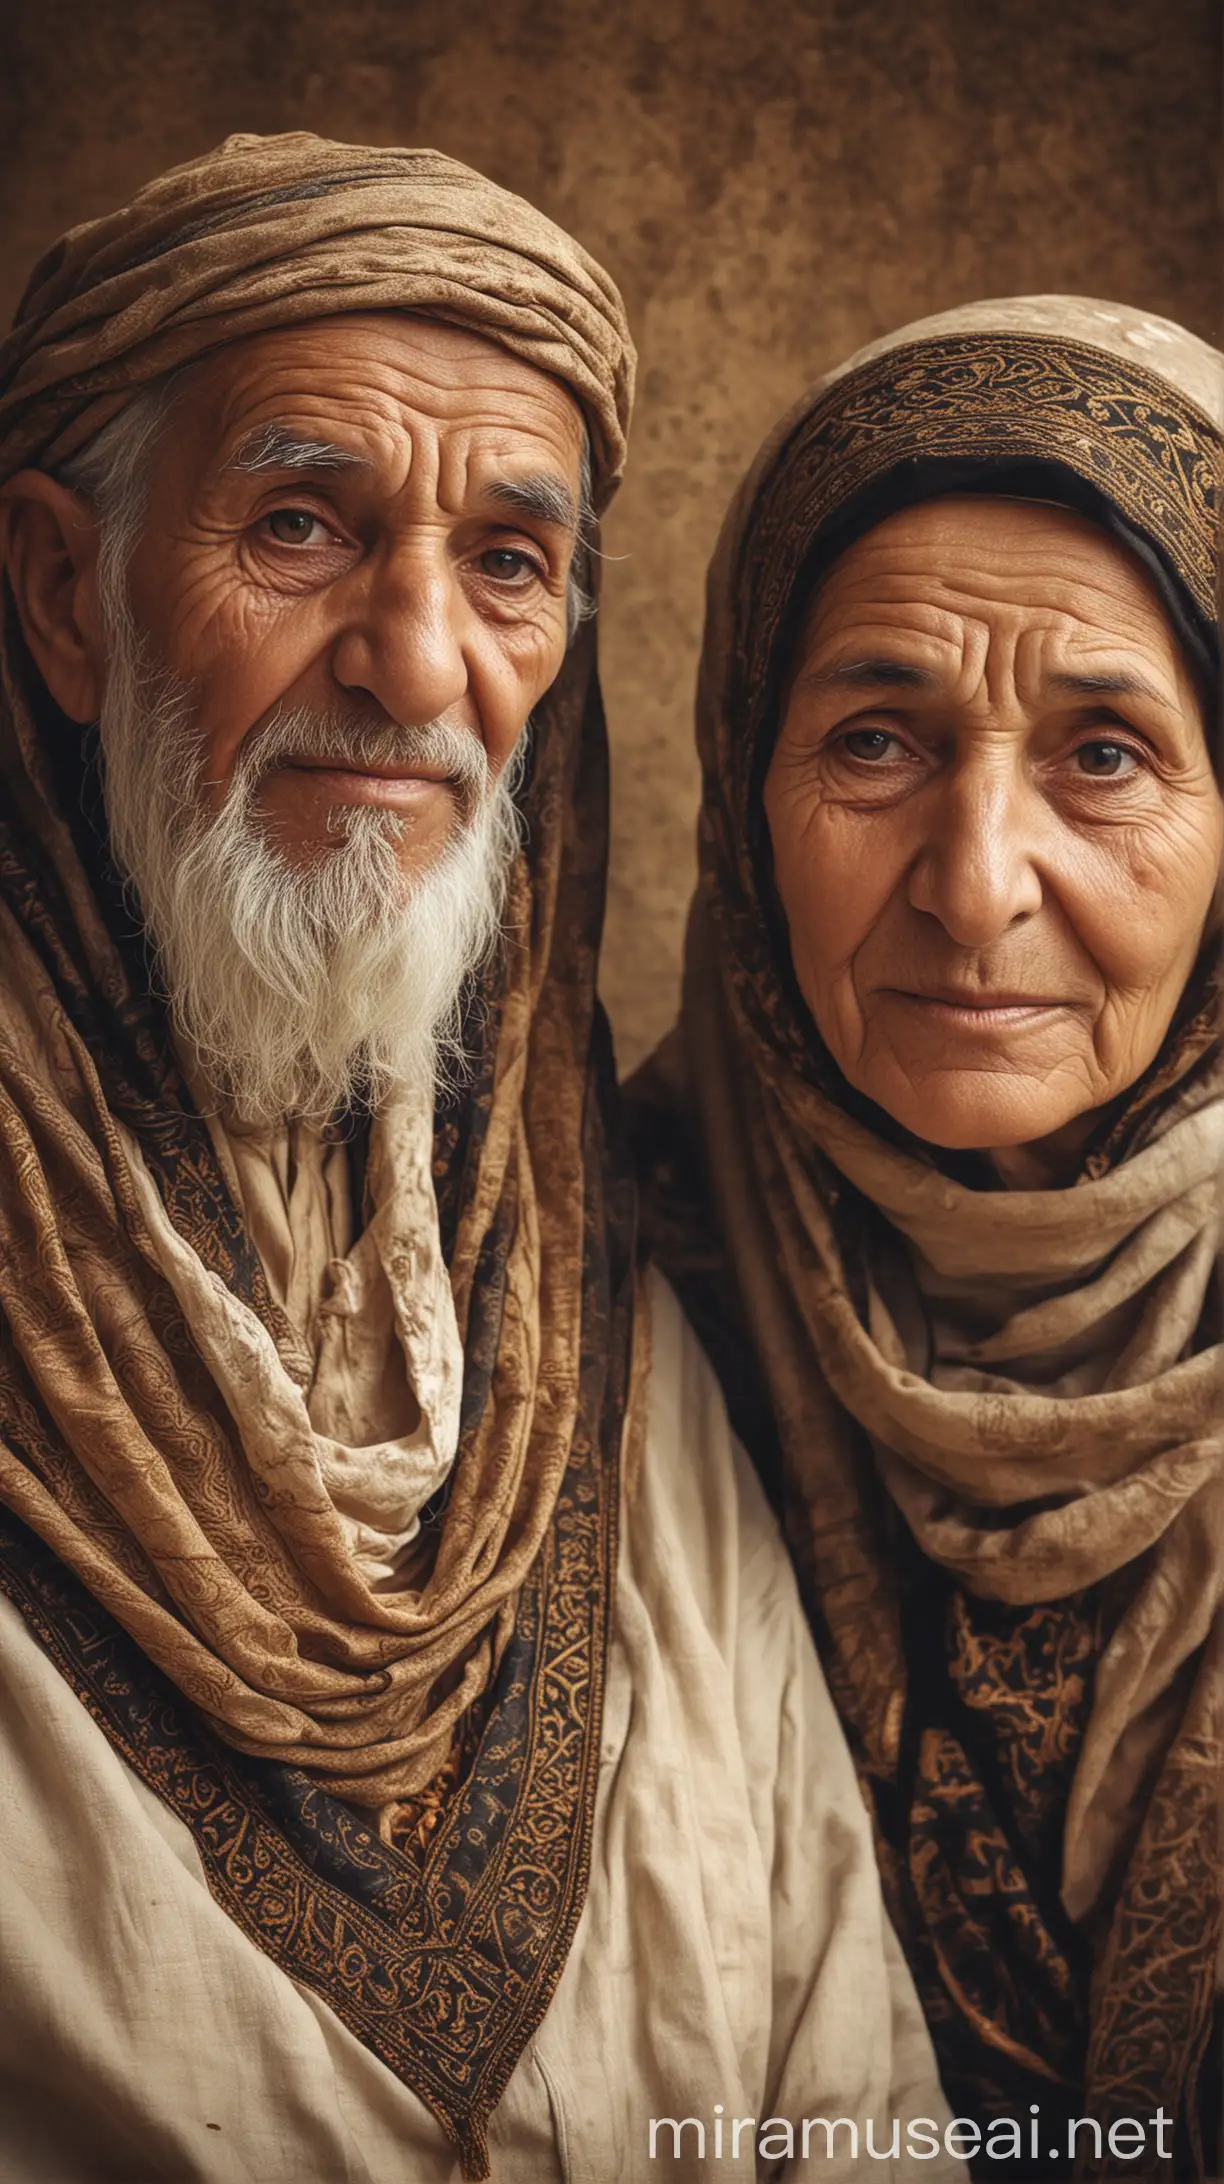 Old man and woman Arabian in ancient world 